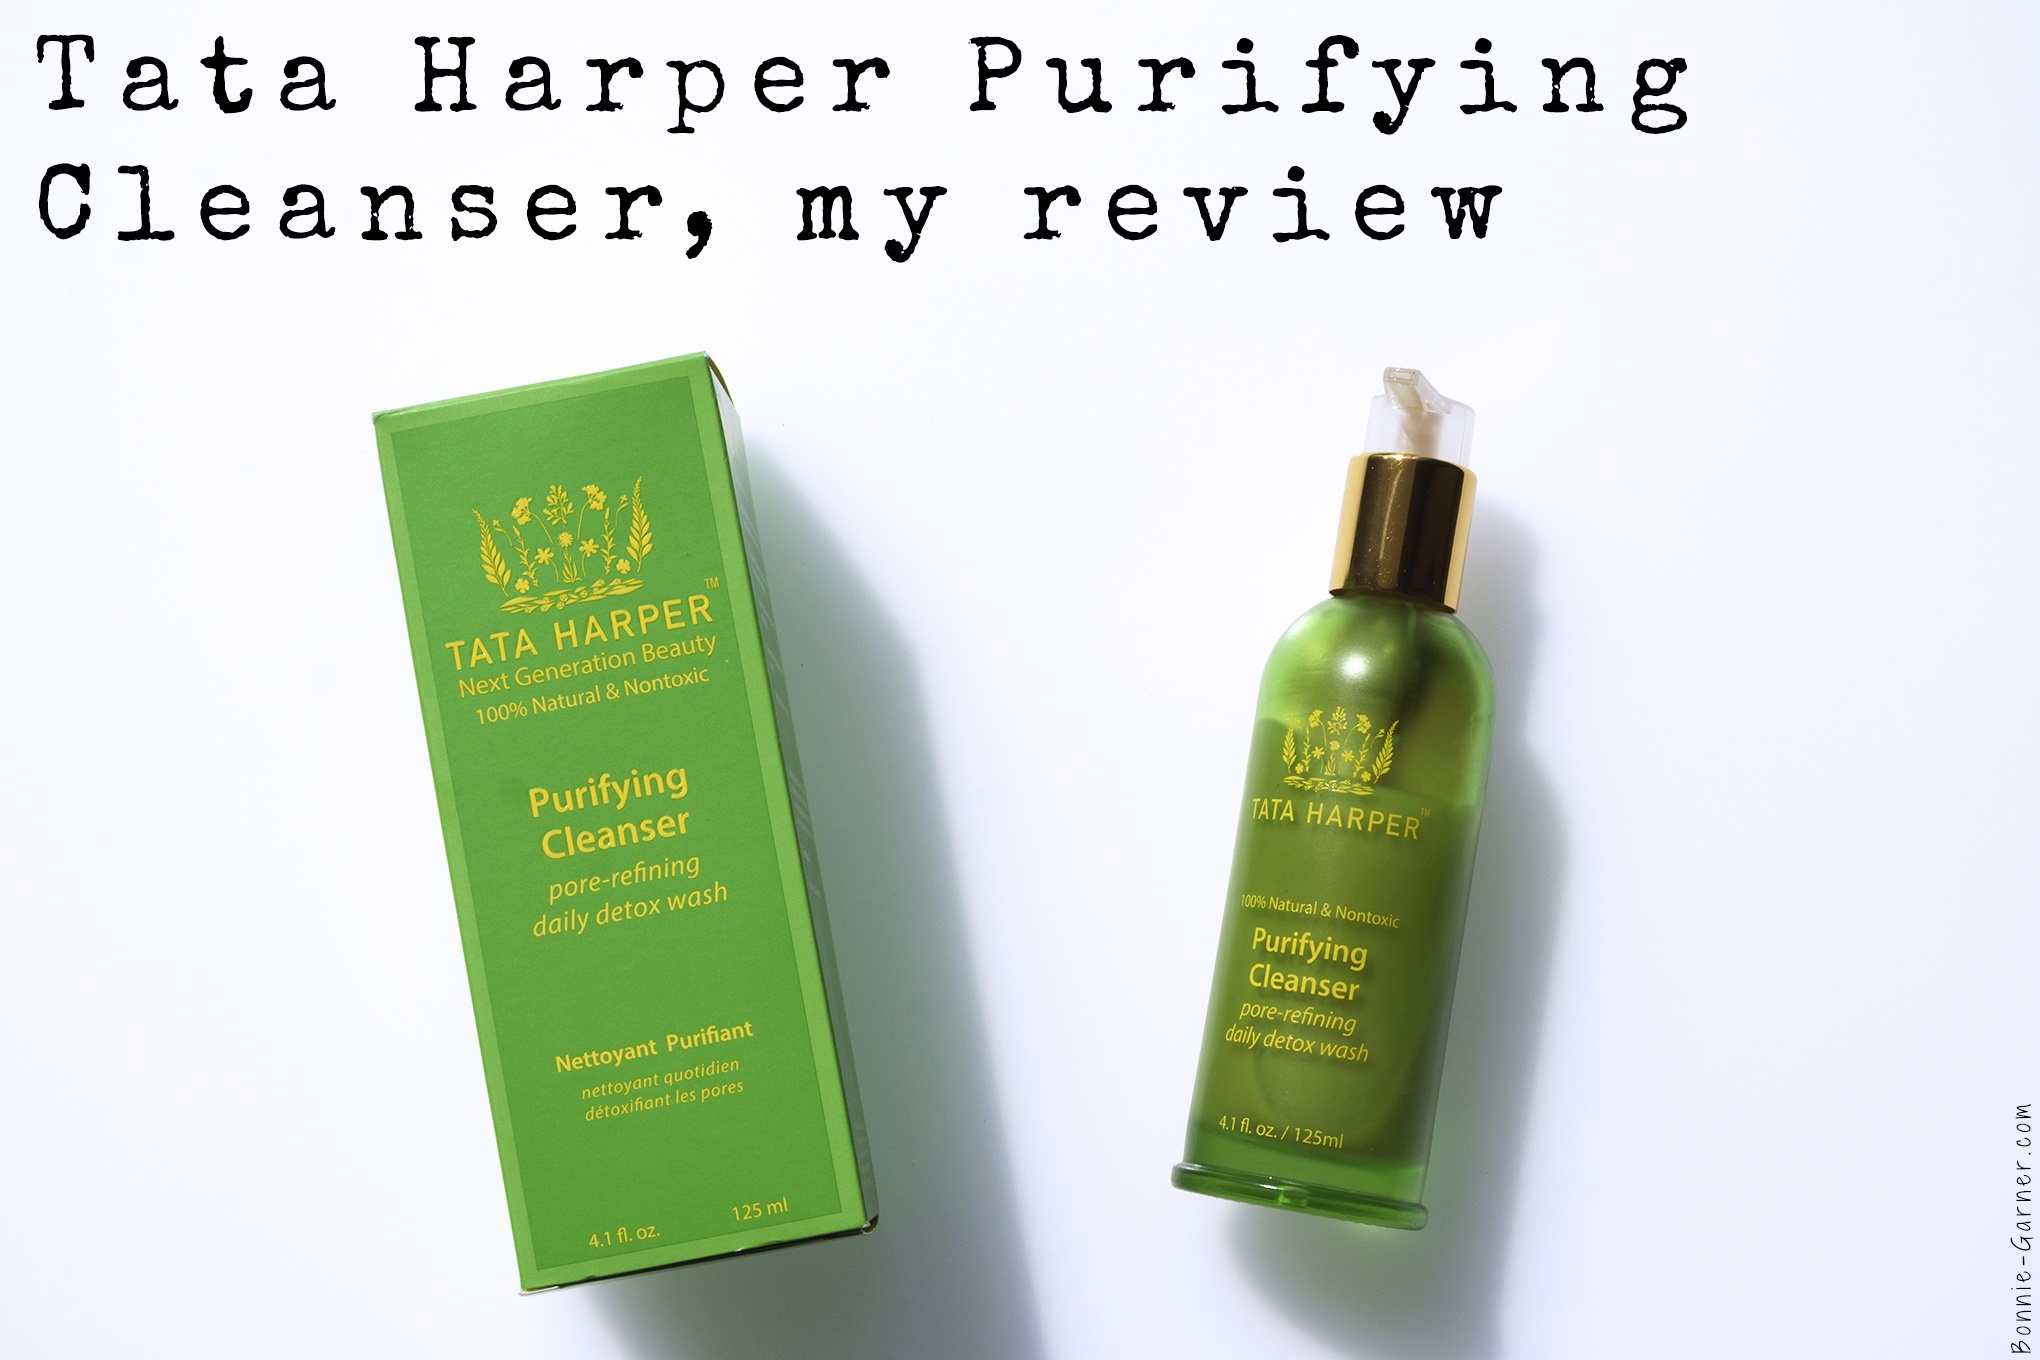 Tata Harper Purifying Cleanser, my review